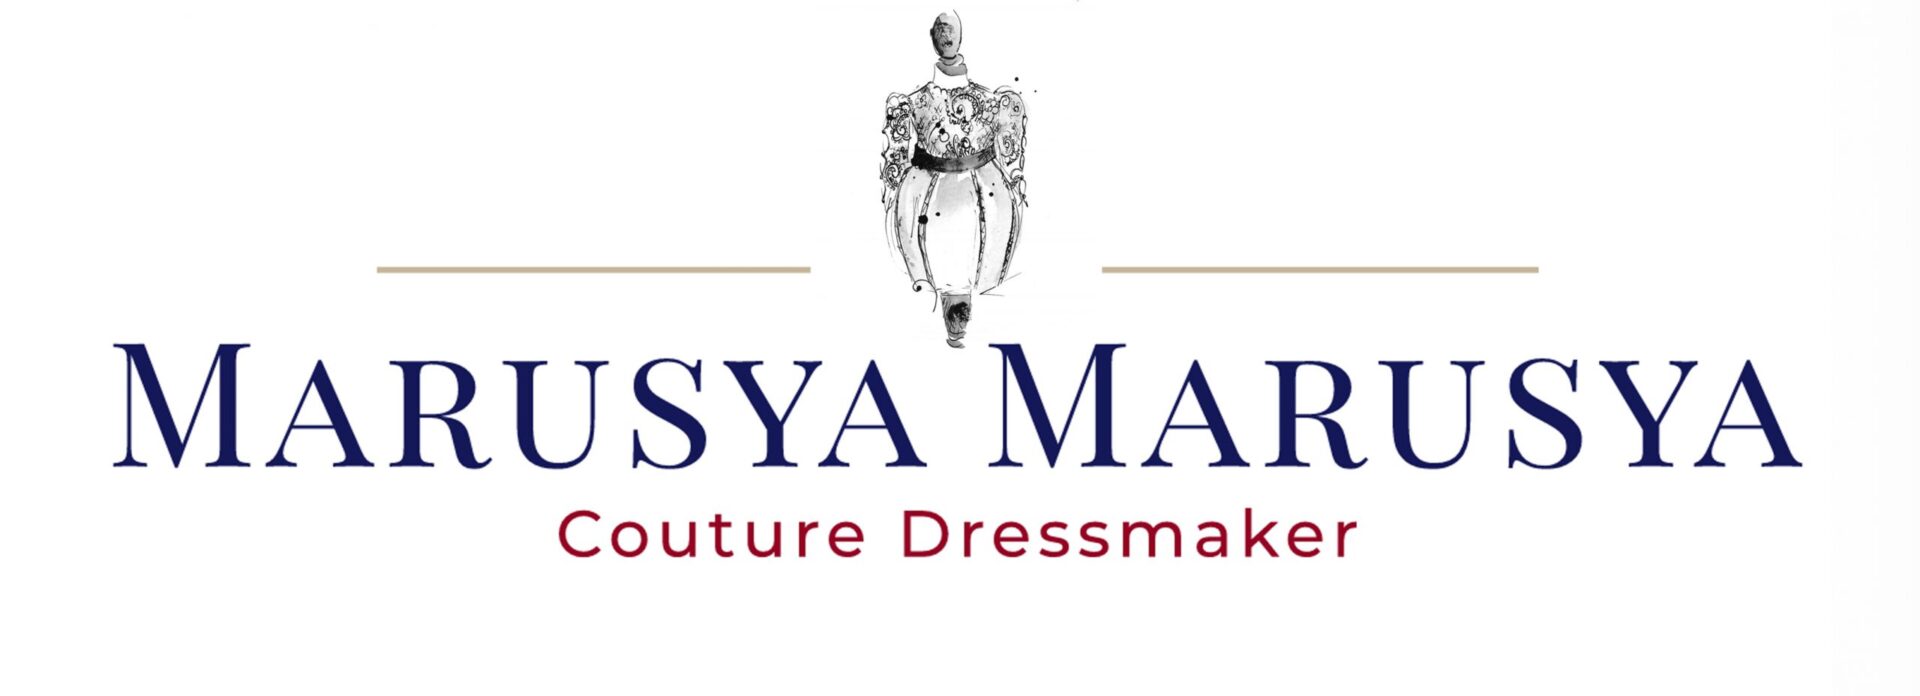 Couture Dressmaker for Anagrassia